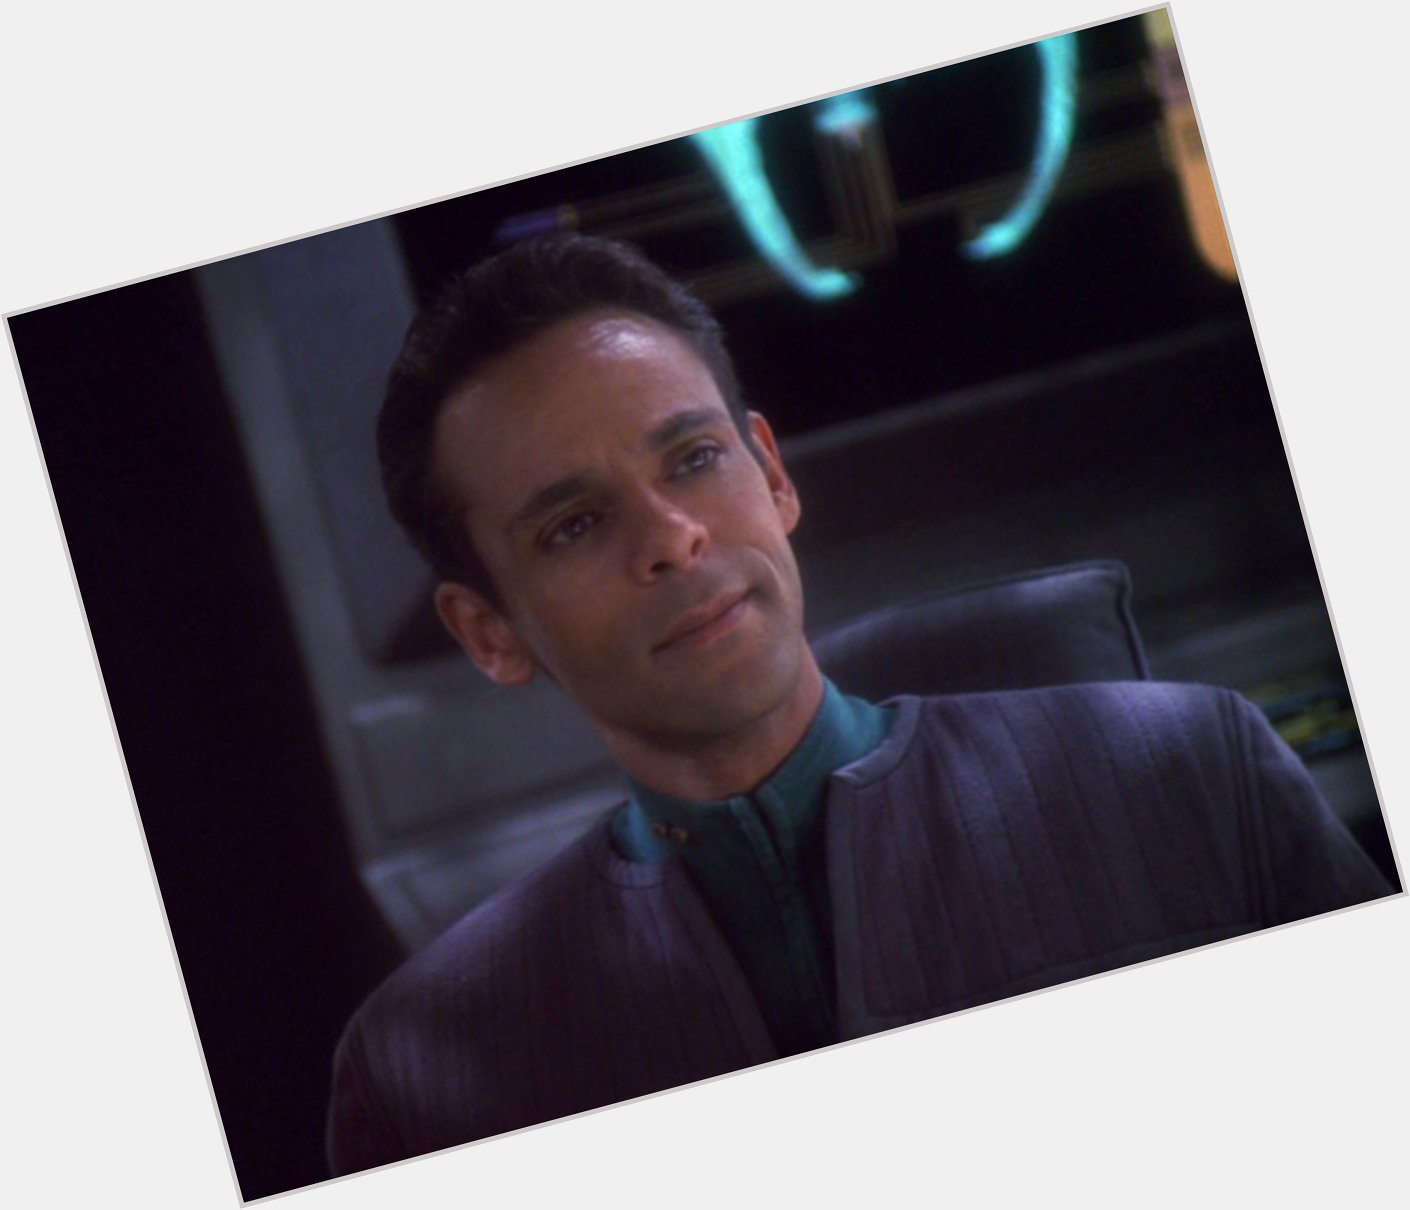 A happy birthday to the always fantastic actor, Alexander Siddig! 